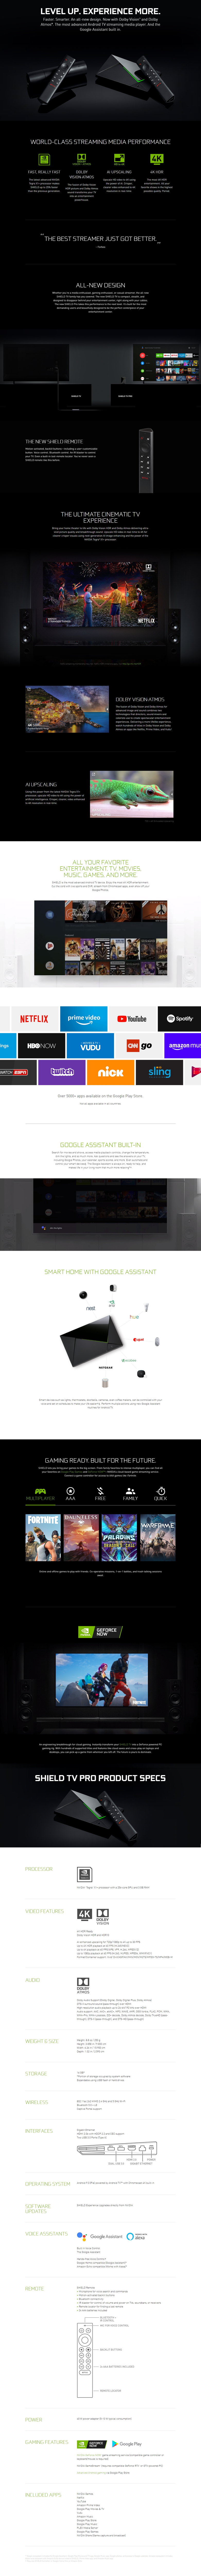 A large marketing image providing additional information about the product NVIDIA Shield TV Pro Android Media Player - Additional alt info not provided